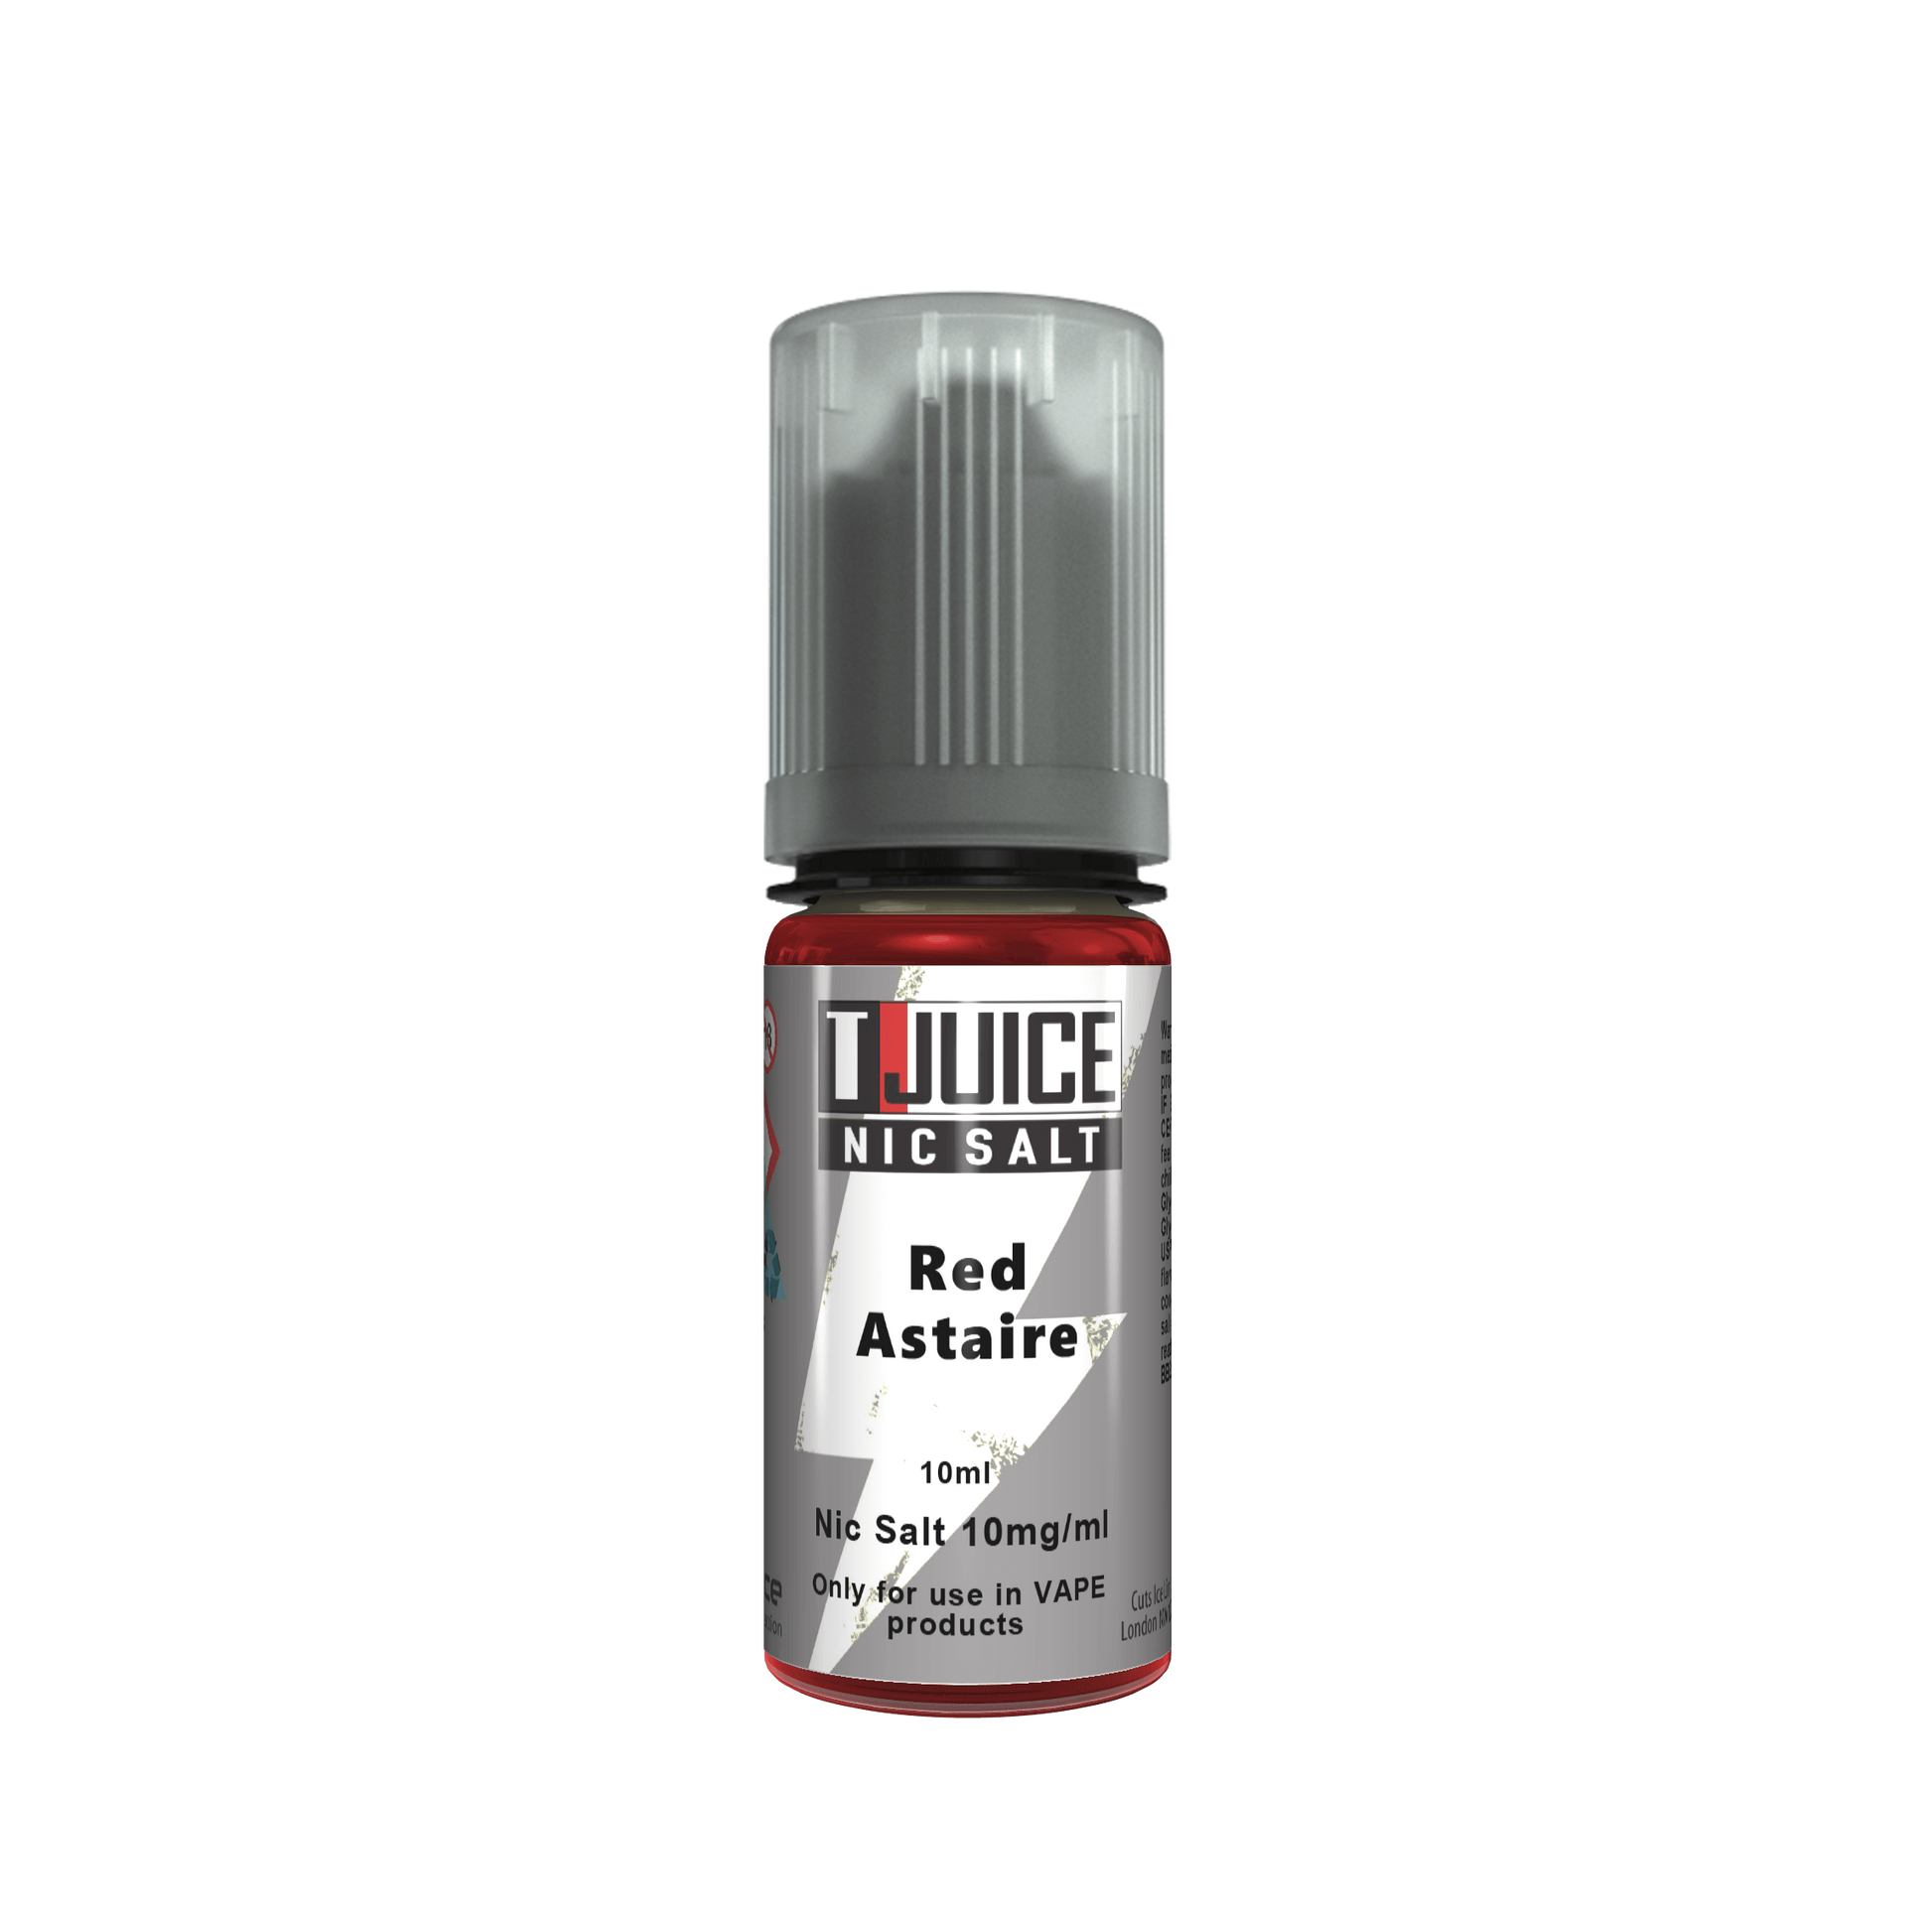 T-Juice - Red Astaire Nic Salt 10ml - The Ace Of Vapez